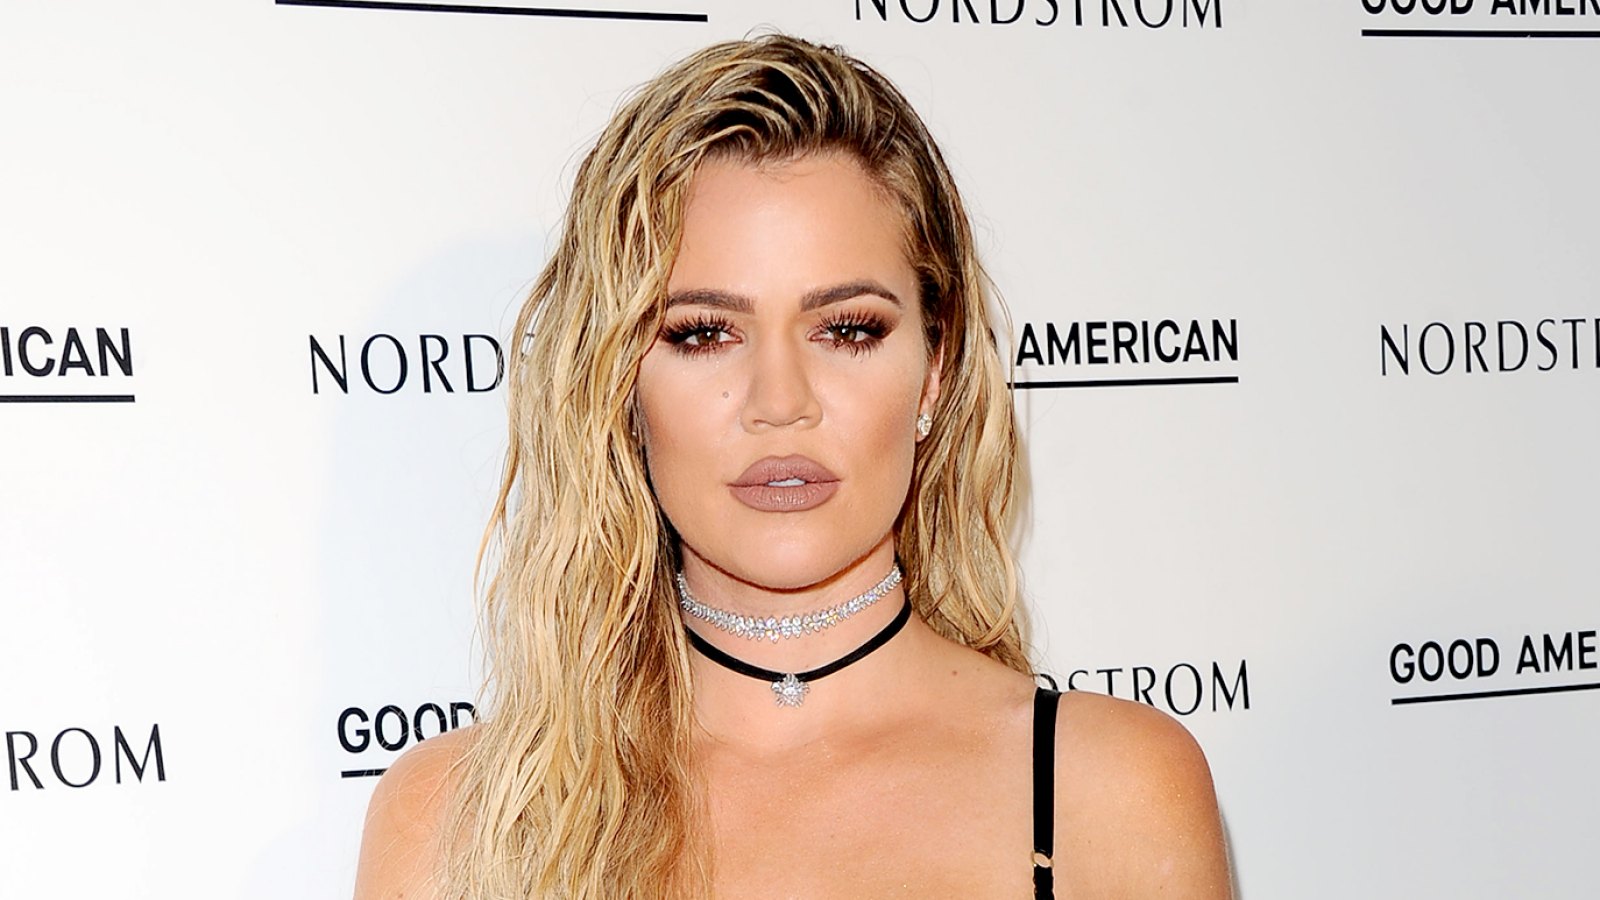 Khloe-Kardashian-Dragged-for-Telling-Fan-It's-'Cute'-She-Has-to-Work-Extra-Hours-to-Afford-Good-American-Jeans